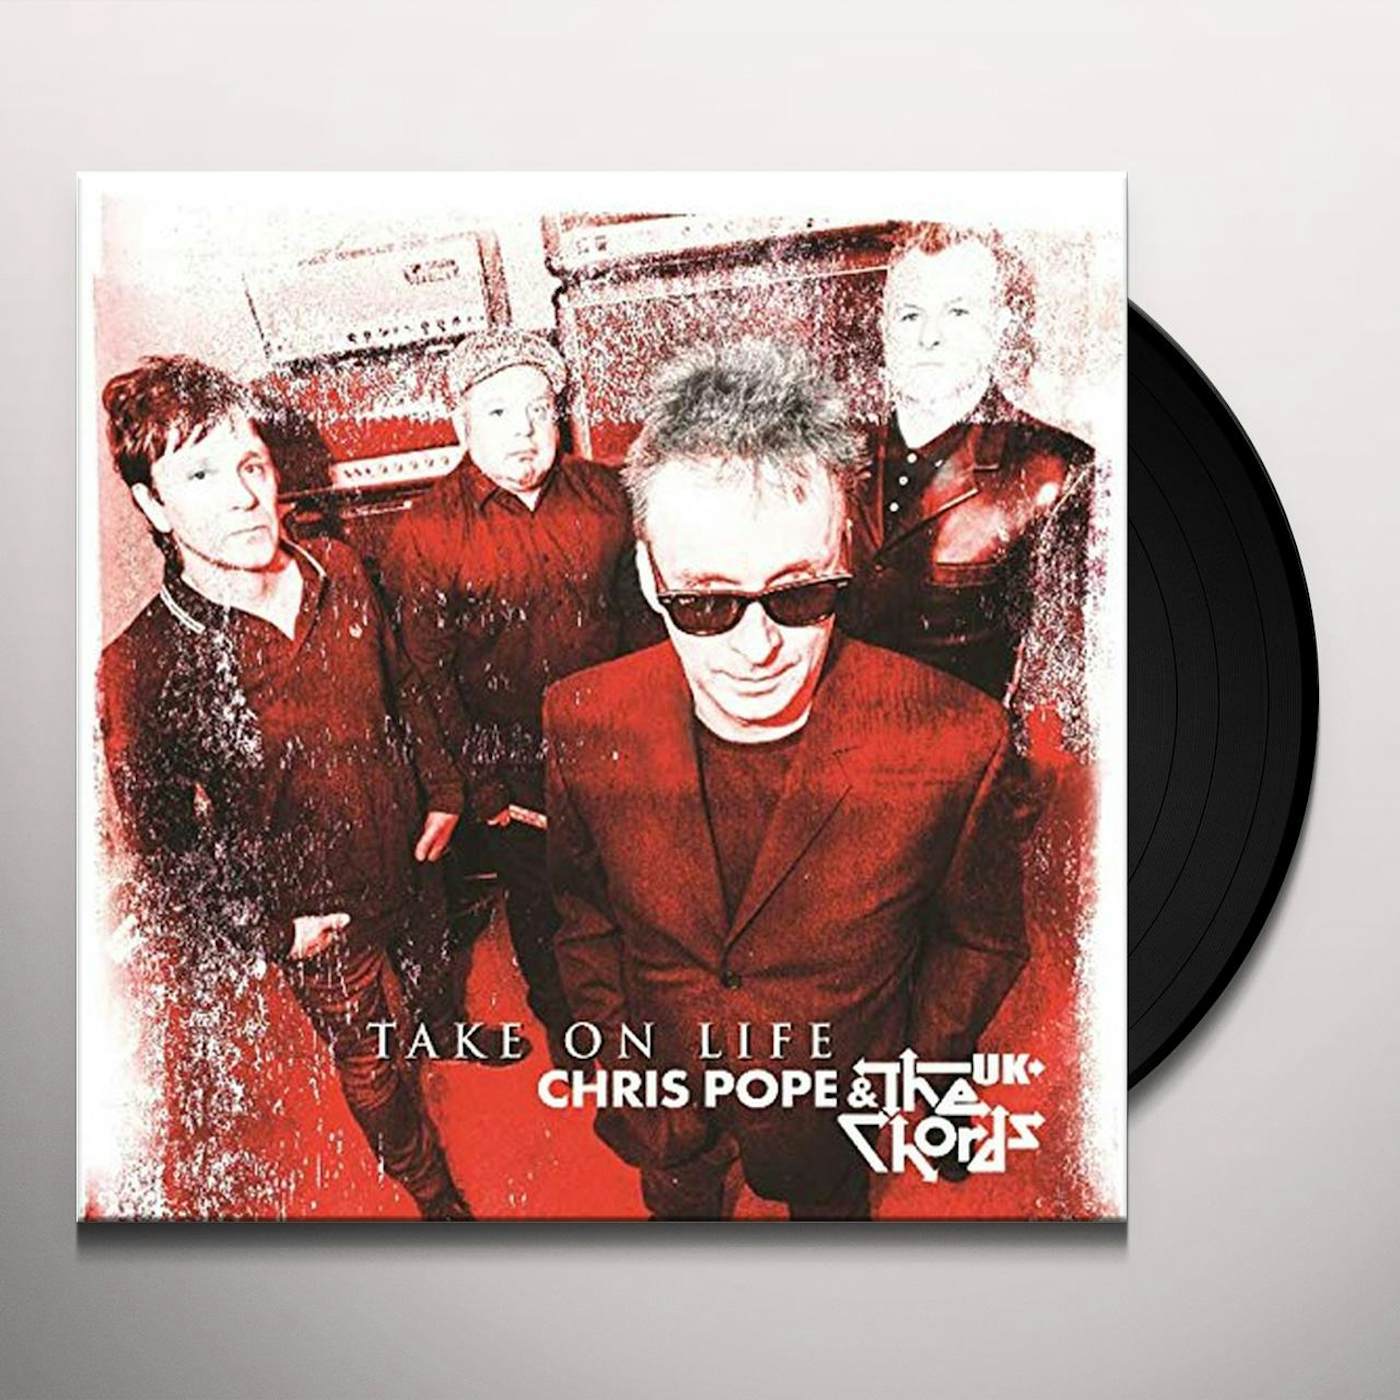 Chris Pope & The Chords Take on Life Vinyl Record